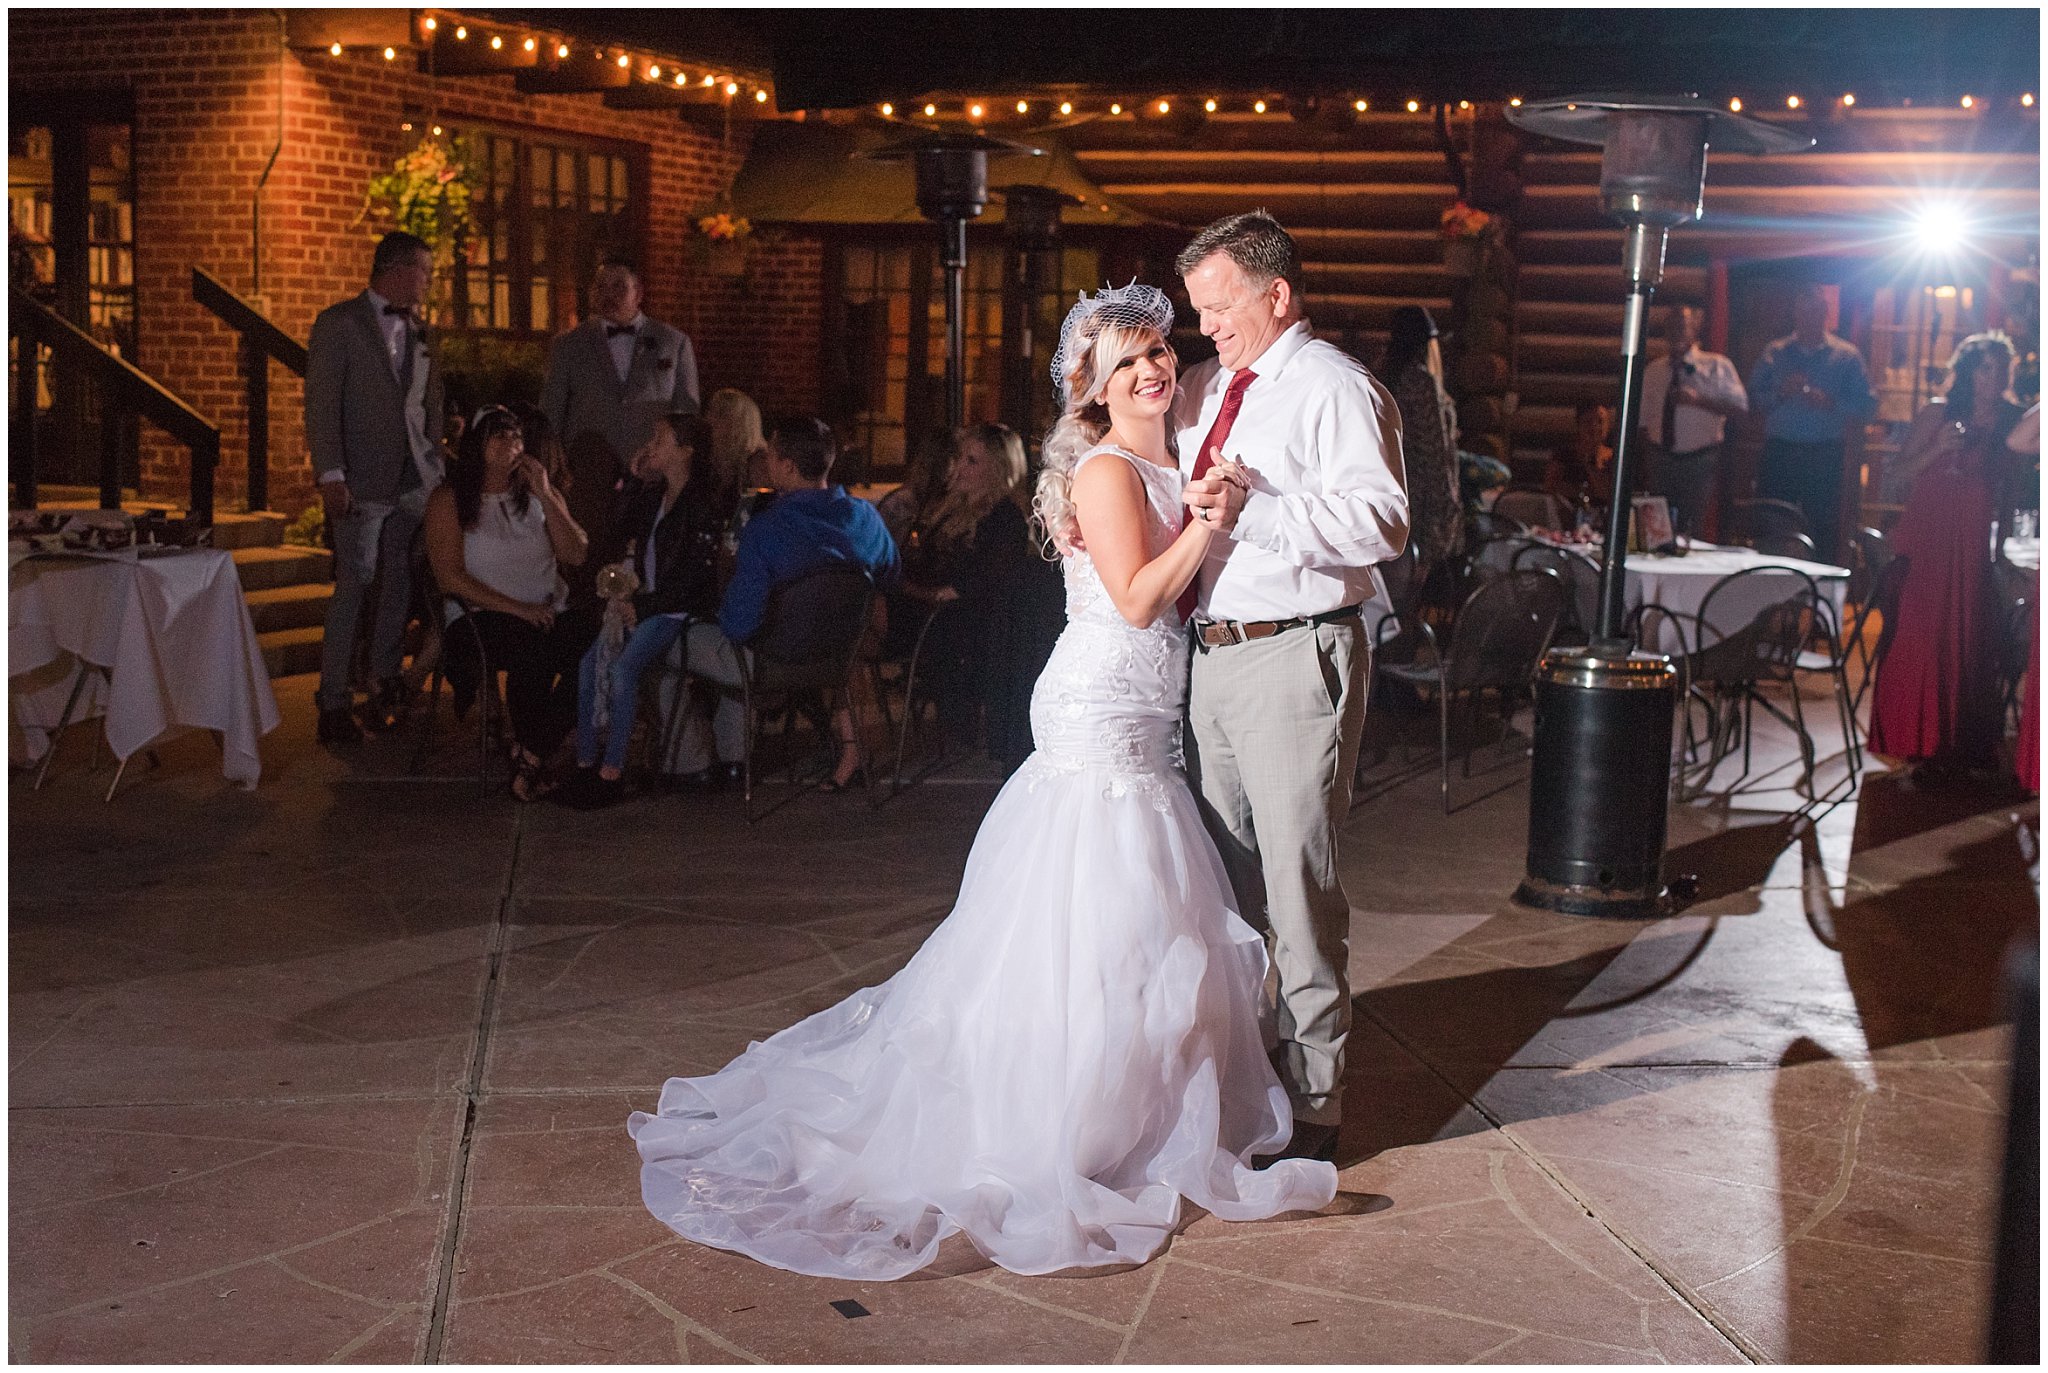 Daddy Daughter dance during wedding reception | Log Haven Summer Mountain Wedding | Jessie and Dallin Photography